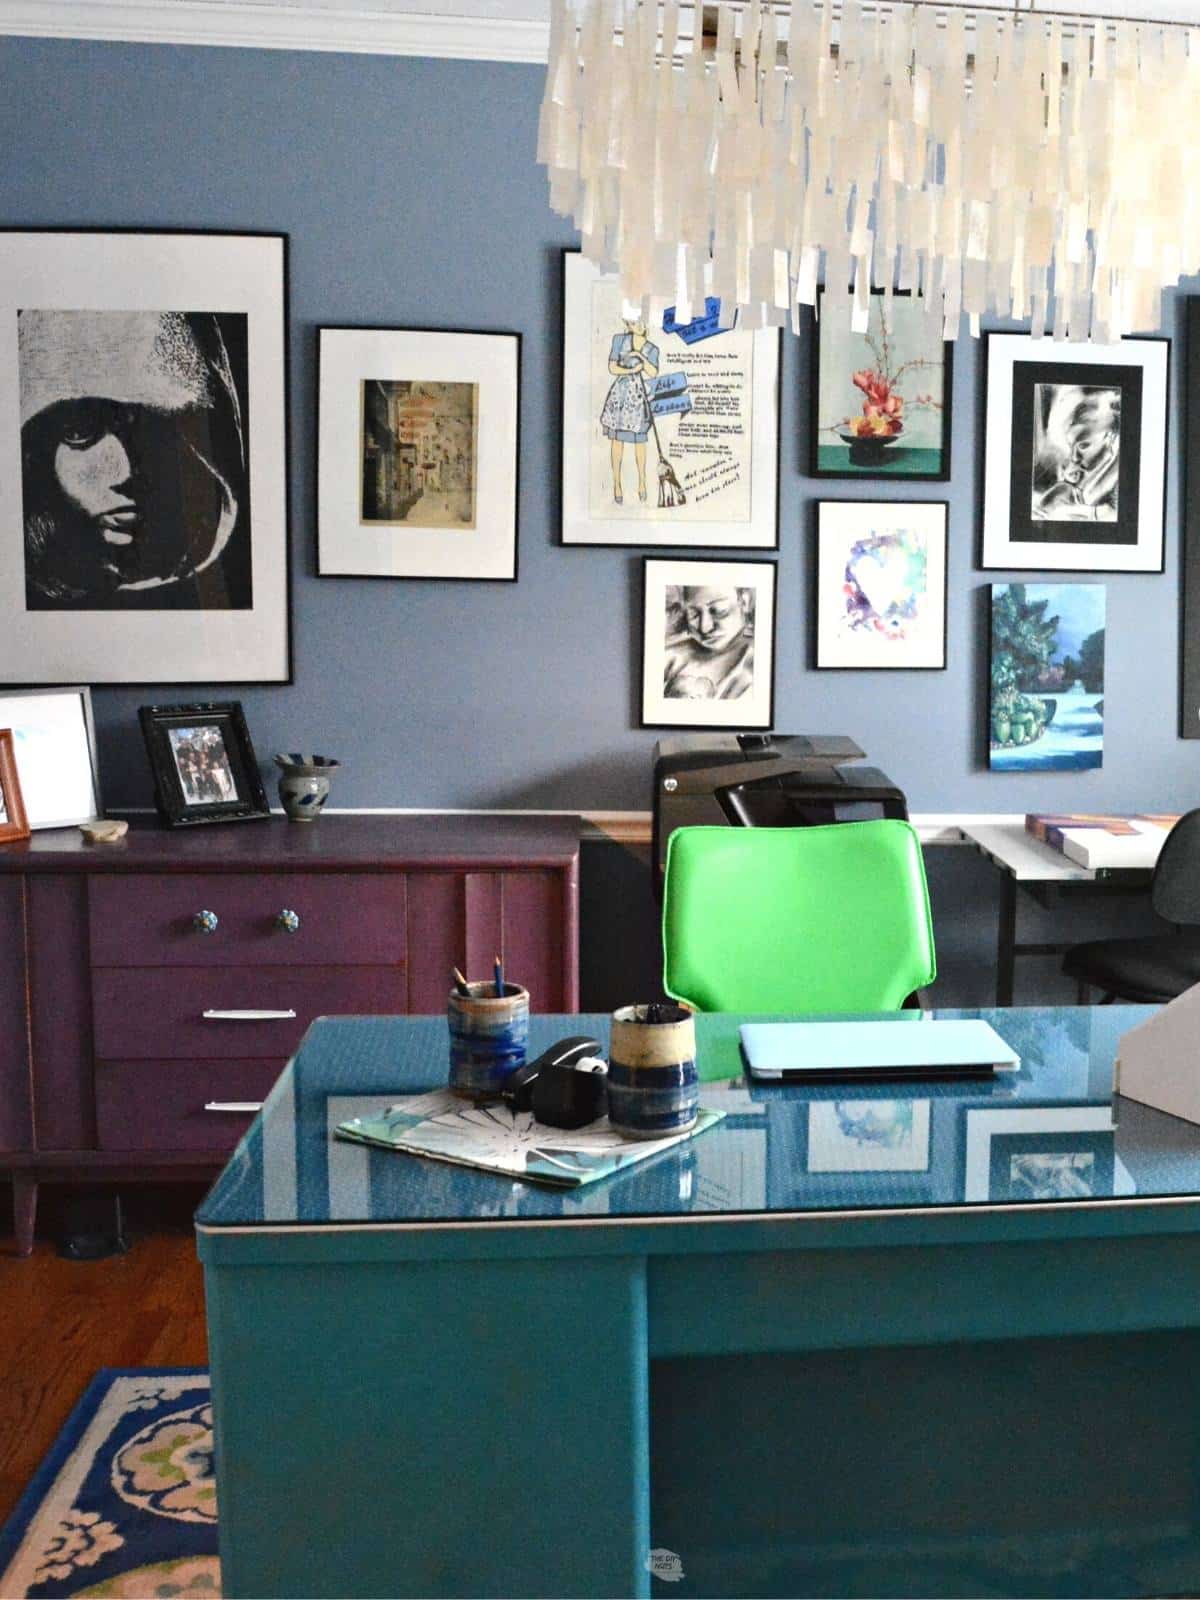 green desk chair and teal metal desk with artwork on the wall.